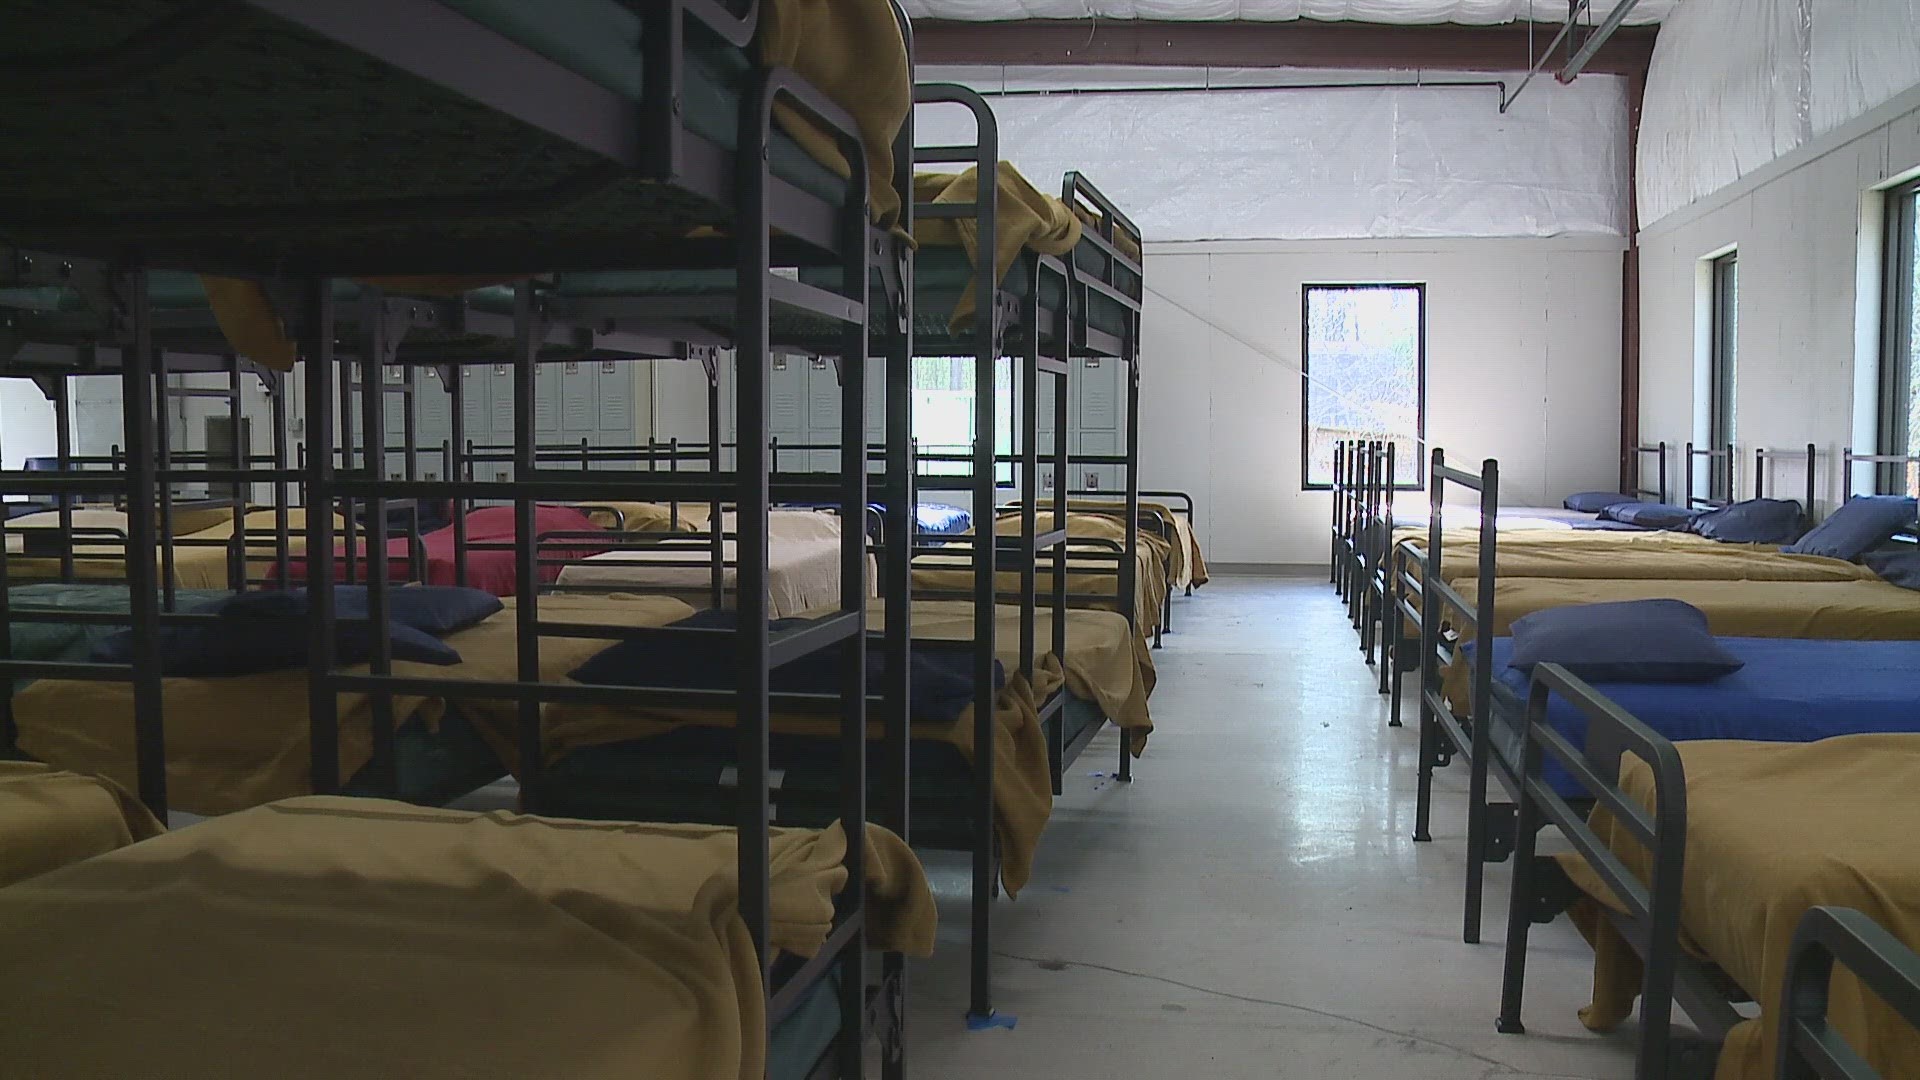 Asylum seekers who are currently at Portland's Homeless Services Center are being relocated, freeing up 120 beds for the general homeless population.